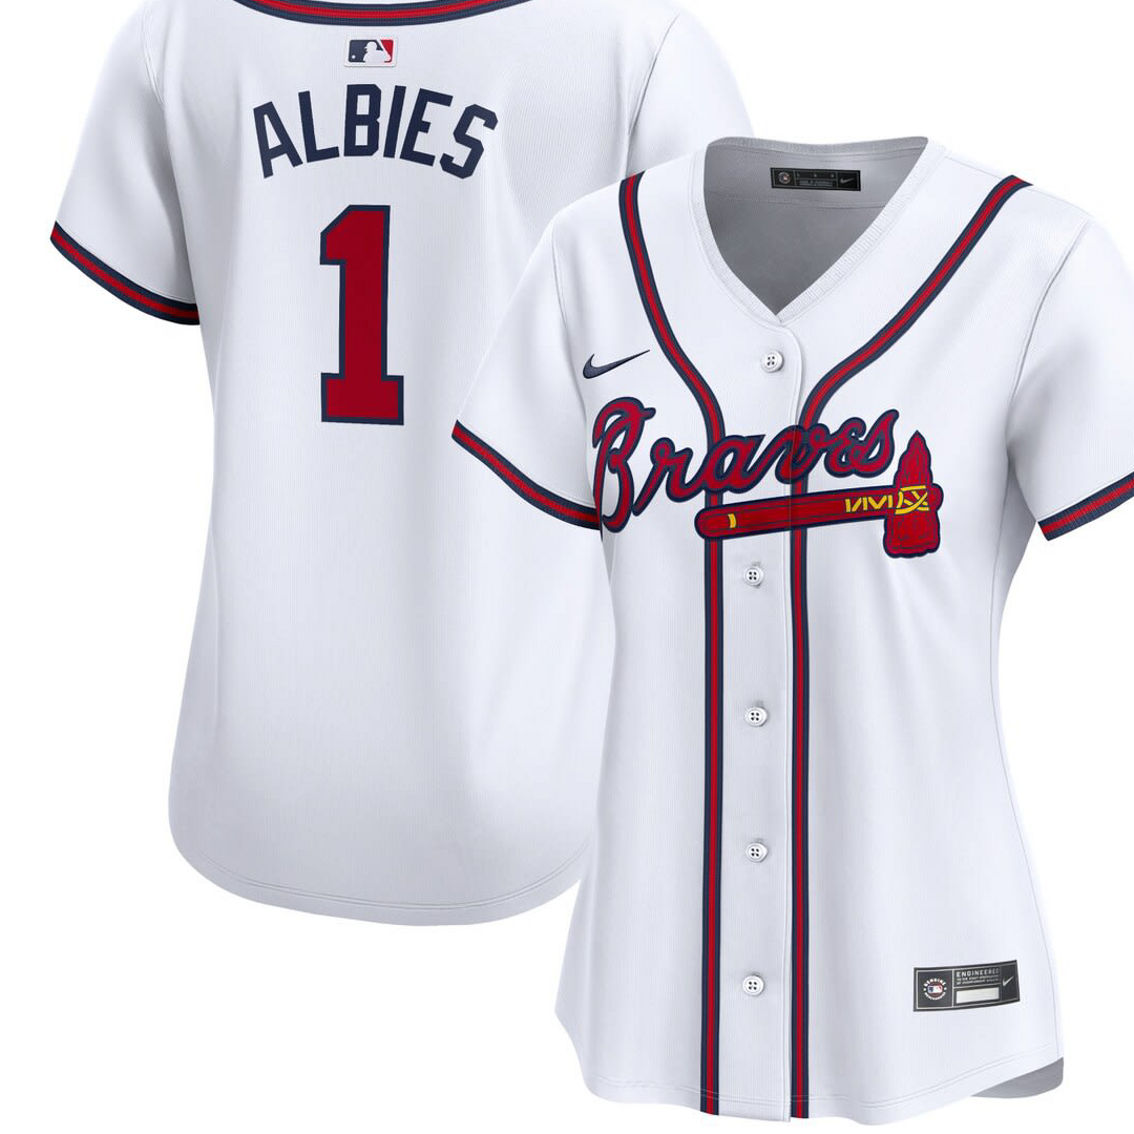 Nike Women's Ozzie Albies White Atlanta Braves Home Limited Player Jersey - Image 2 of 4